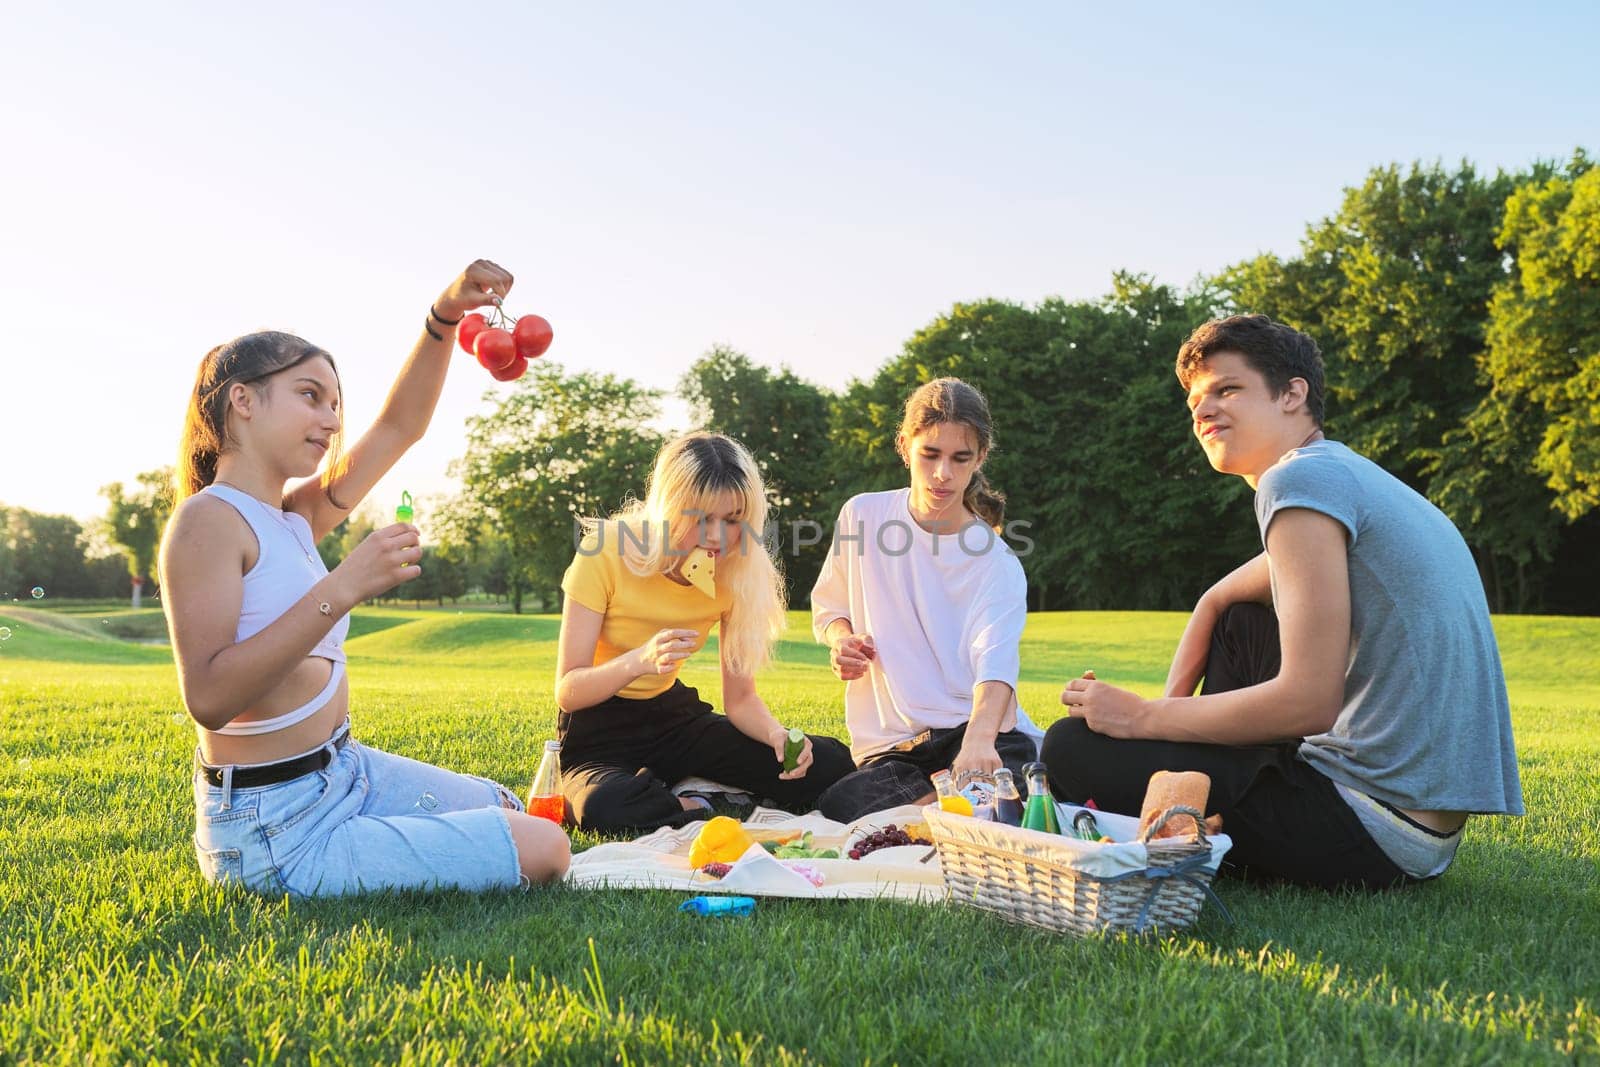 Teens having fun on picnic in park on lawn. Group of teenagers friends resting eating talking on sunny summer day on green grass. Adolescence, friendship, communication, vacations, fun, youth concept